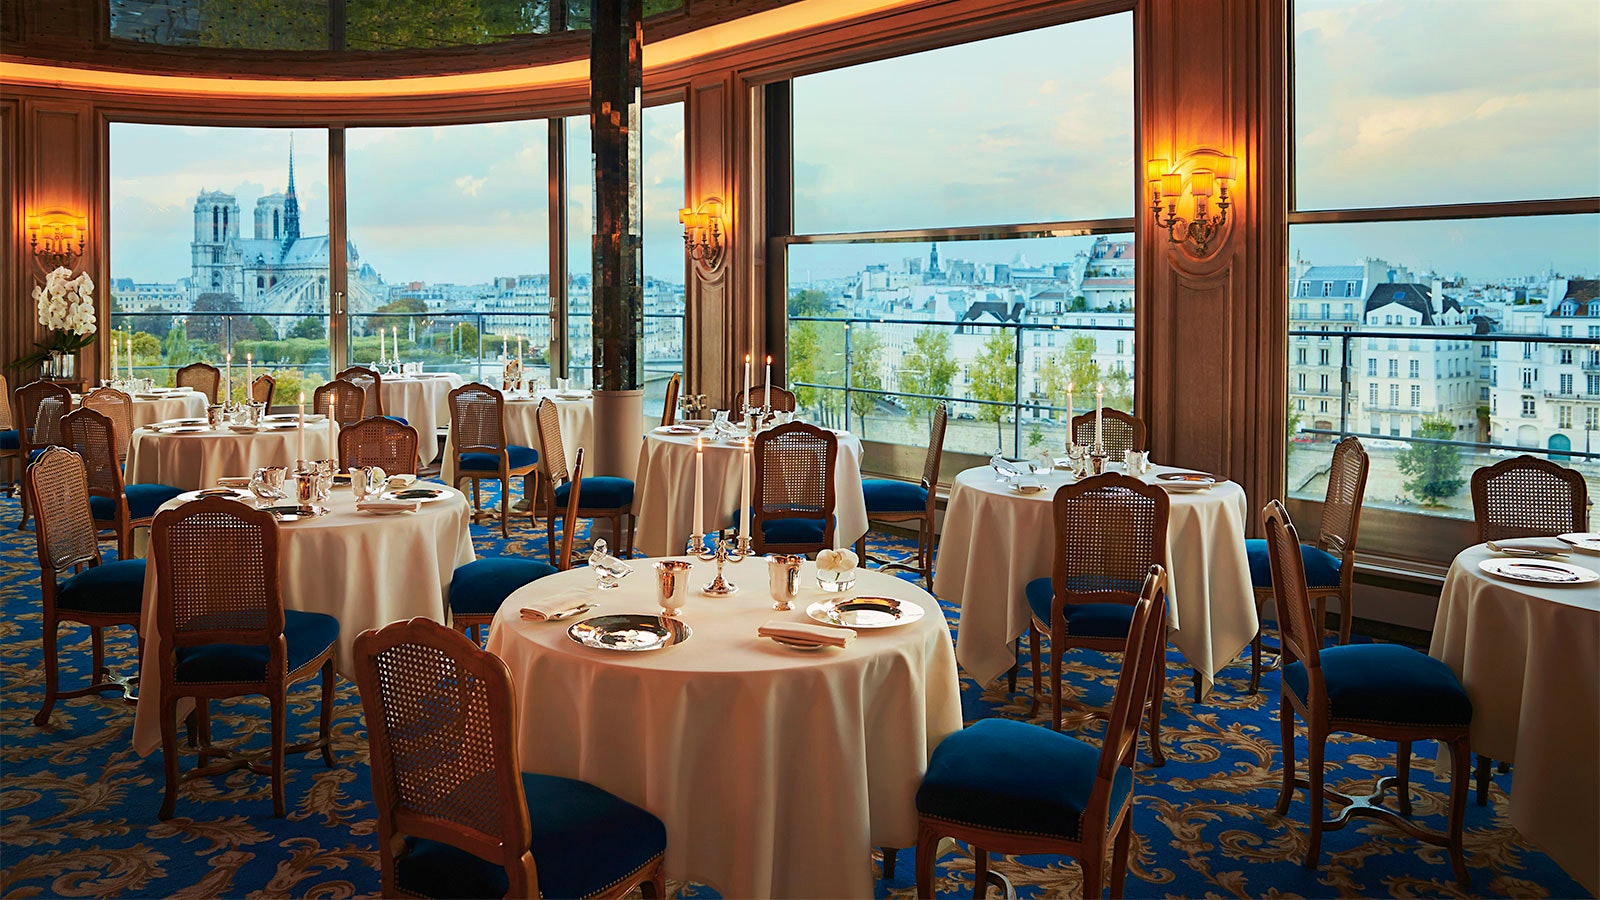  The view of Paris from La Tour d’Argent’s dining room, with Notre Dame Cathedral in the distance.